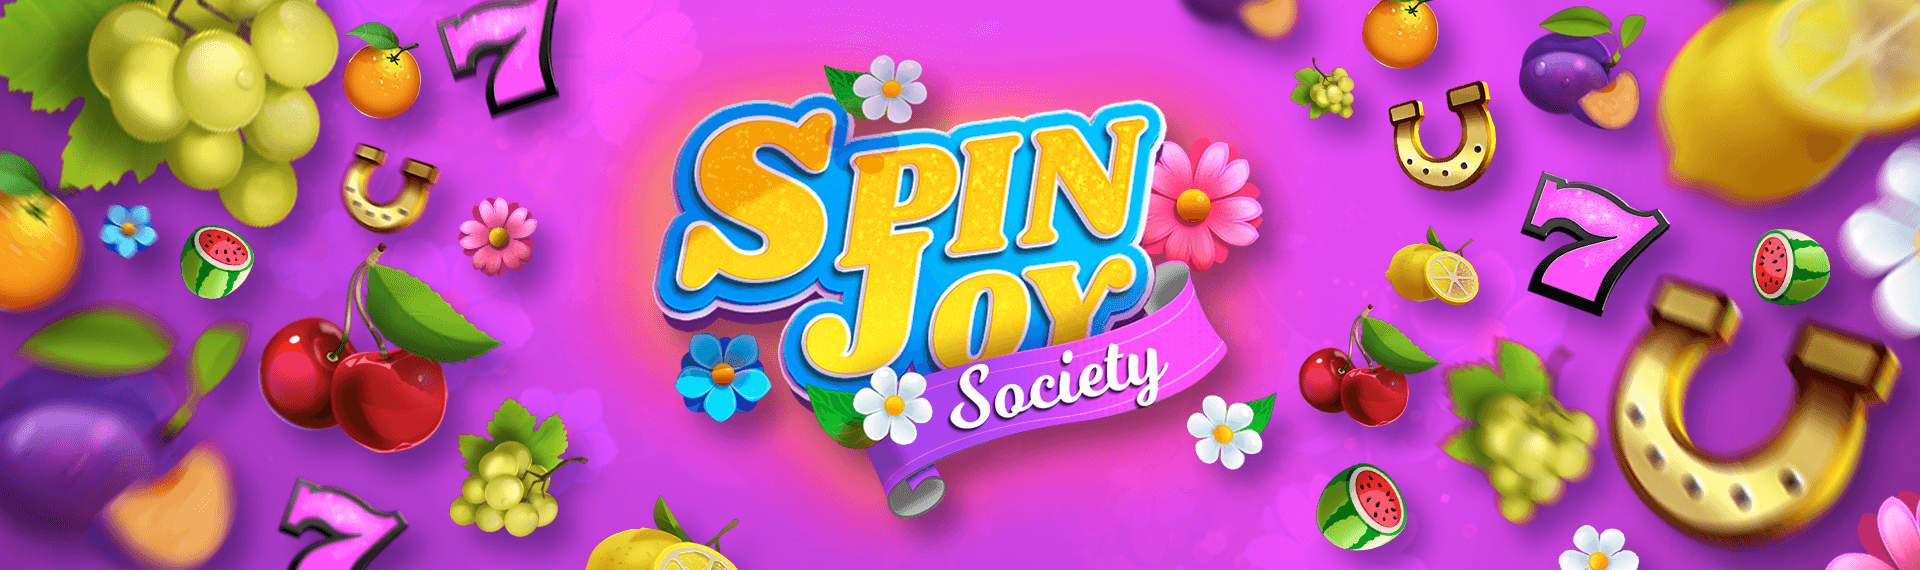 Spin Joy Society Screenshot <br />
<b>Notice</b>:  Undefined variable: key in <b>/var/www/html/wp-content/themes/armadillo/page-game.php</b> on line <b>37</b><br />
1